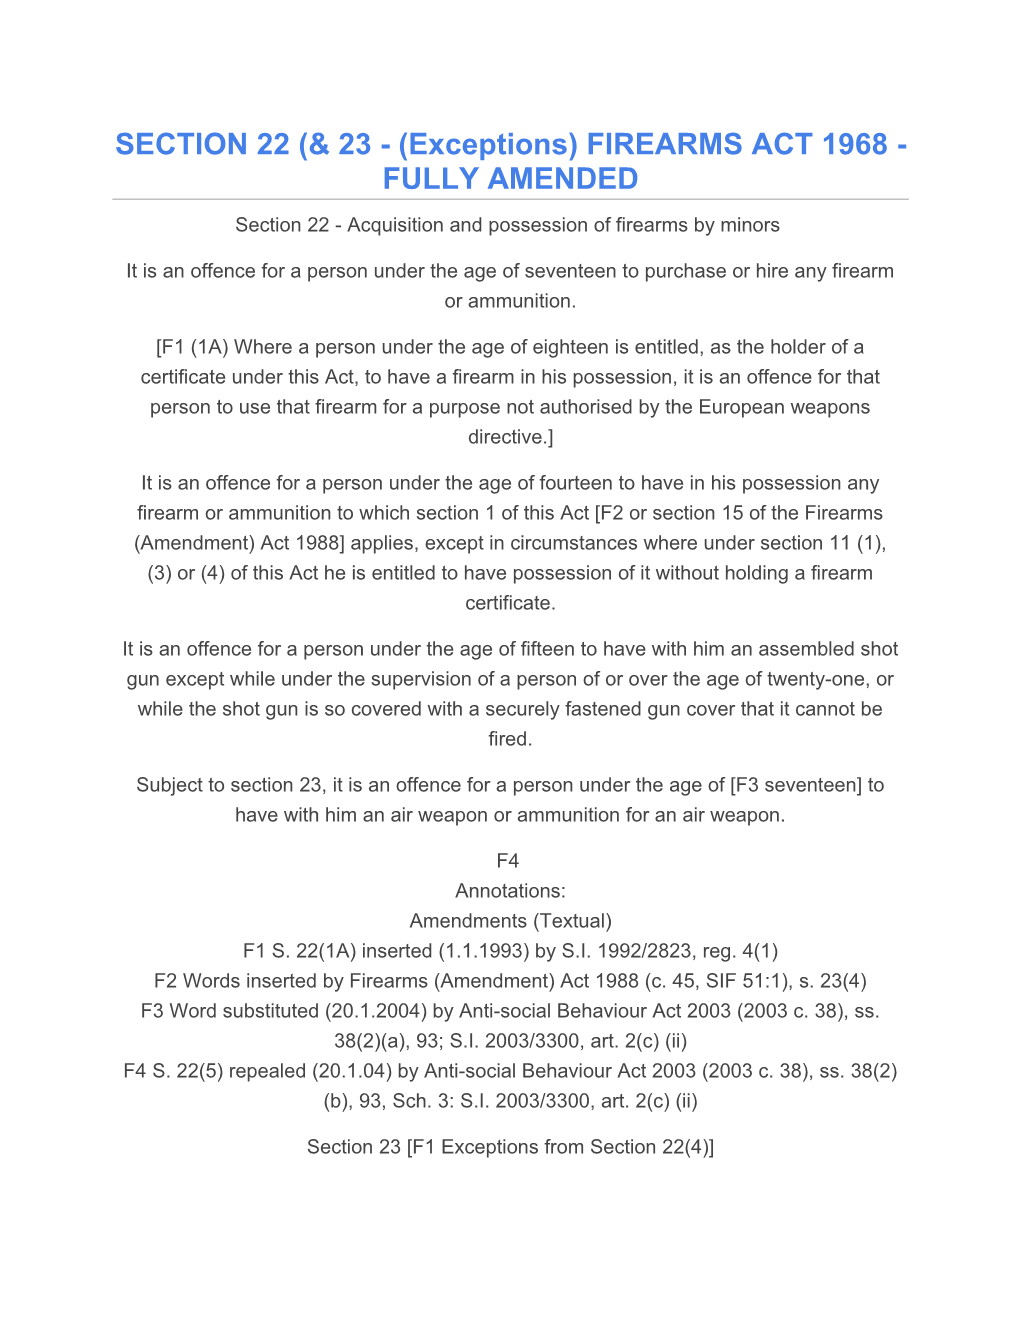 Section 22 - Acquisition and Possession of Firearms by Minors